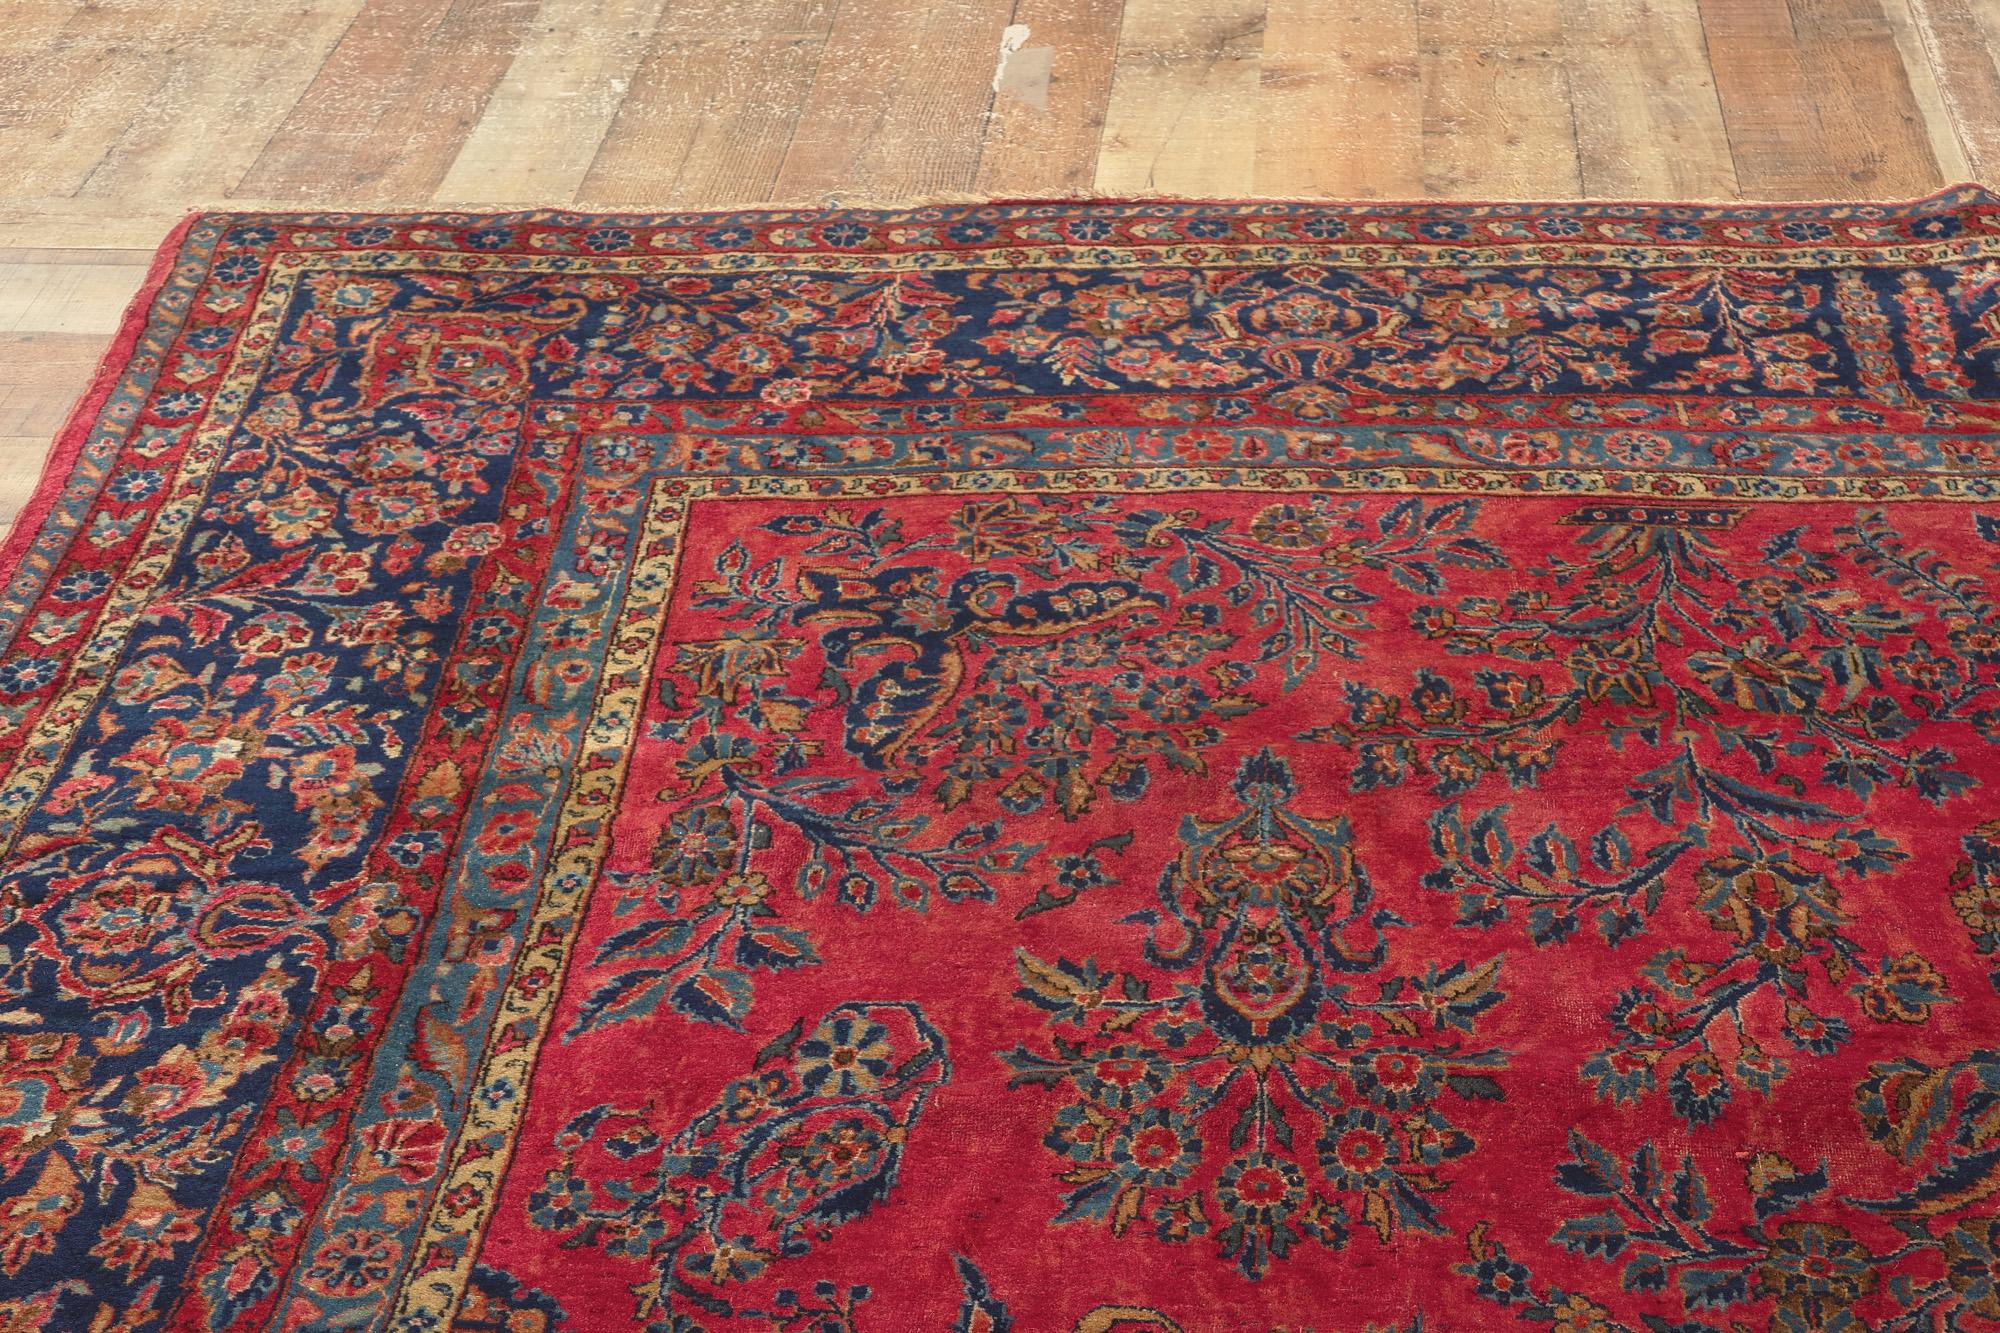 Antique Persian Kashan Rug with Art Nouveau Style in Rich Jewel Tones 2